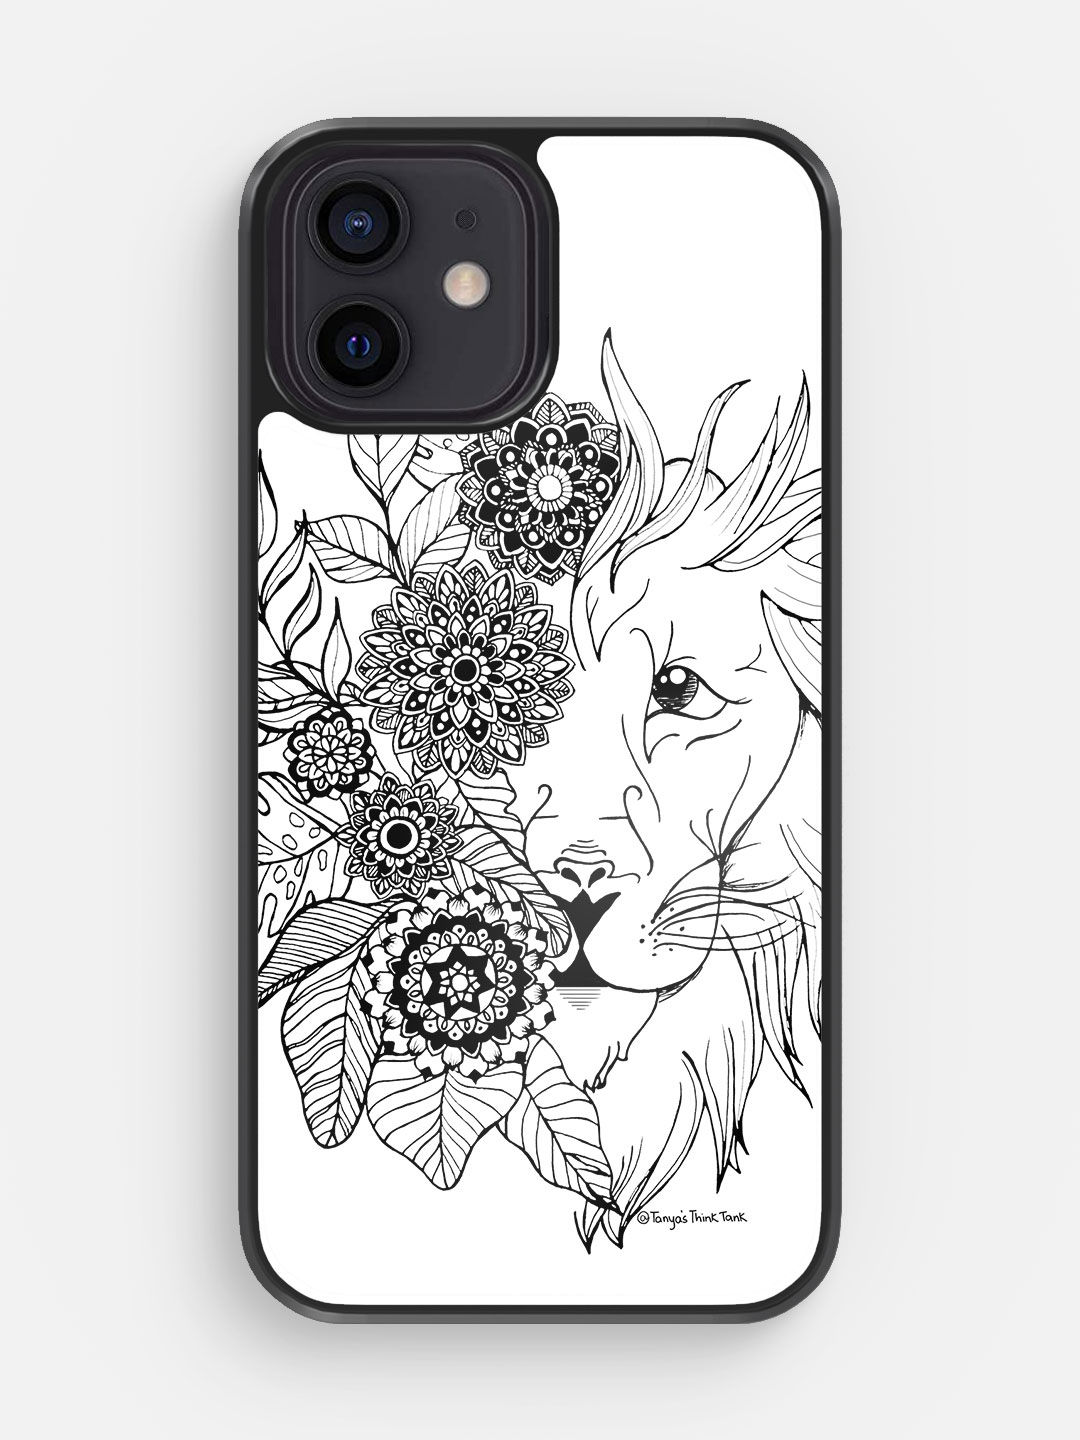 Buy Lion - Bumper Phone Case for iPhone 12 Mini Phone Cases & Covers Online